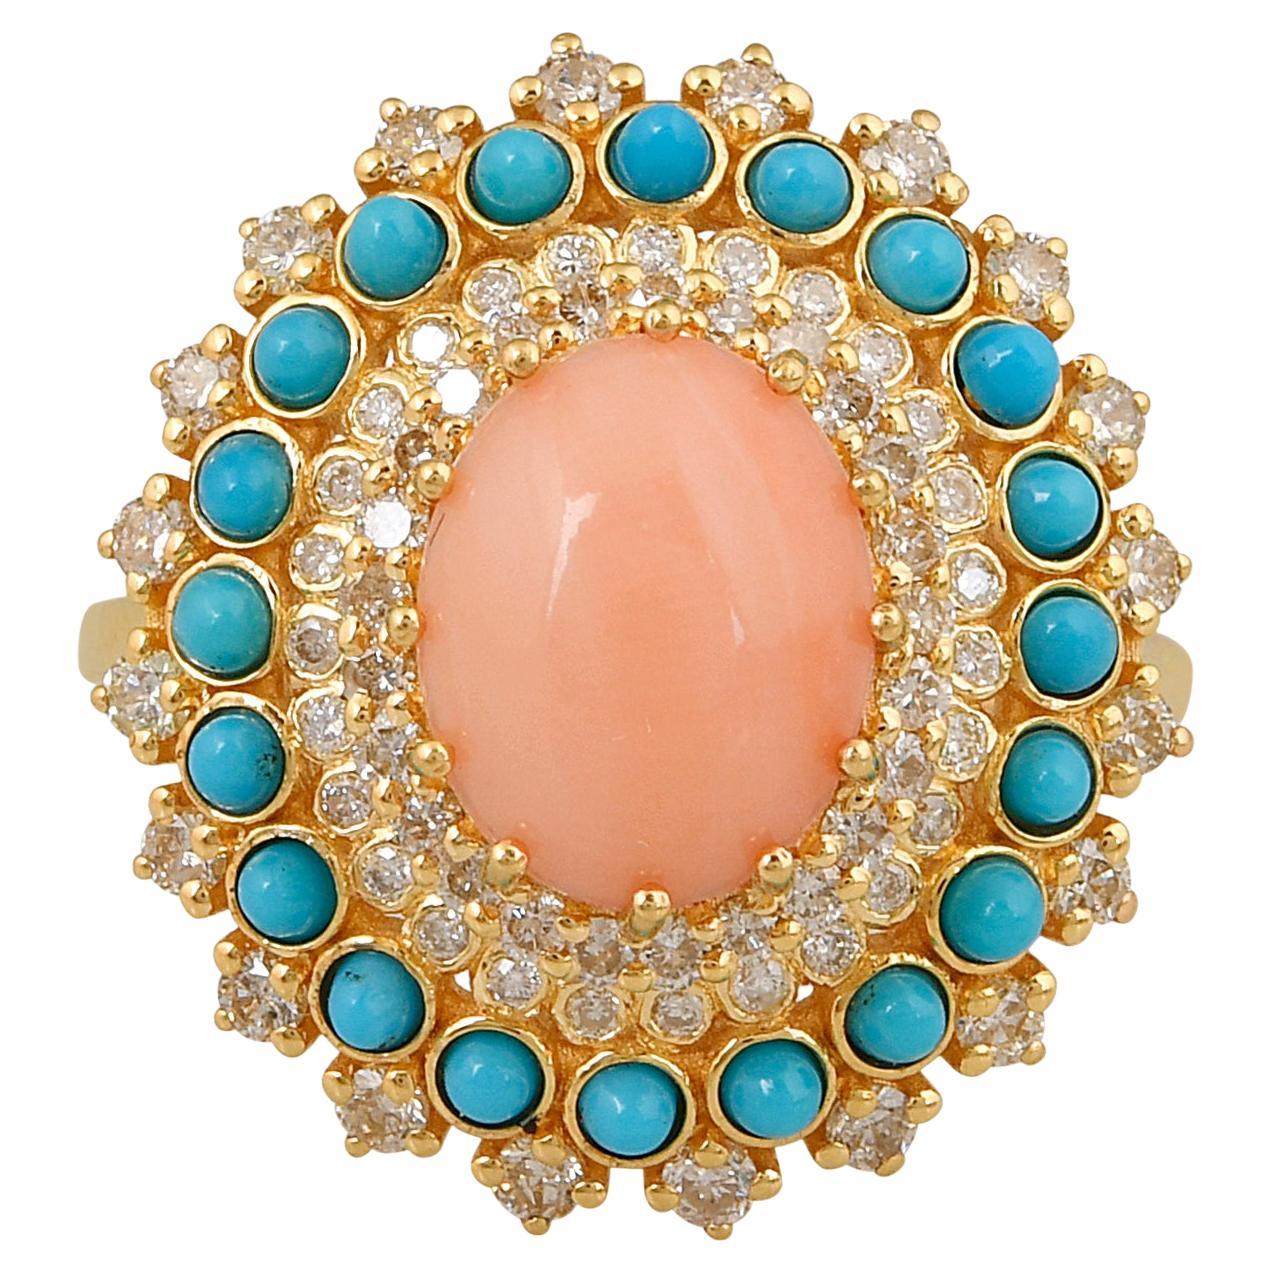 Coral Turquoise Gemstone Pave Diamond Cocktail Ring 18k Yellow Gold Fine Jewelry